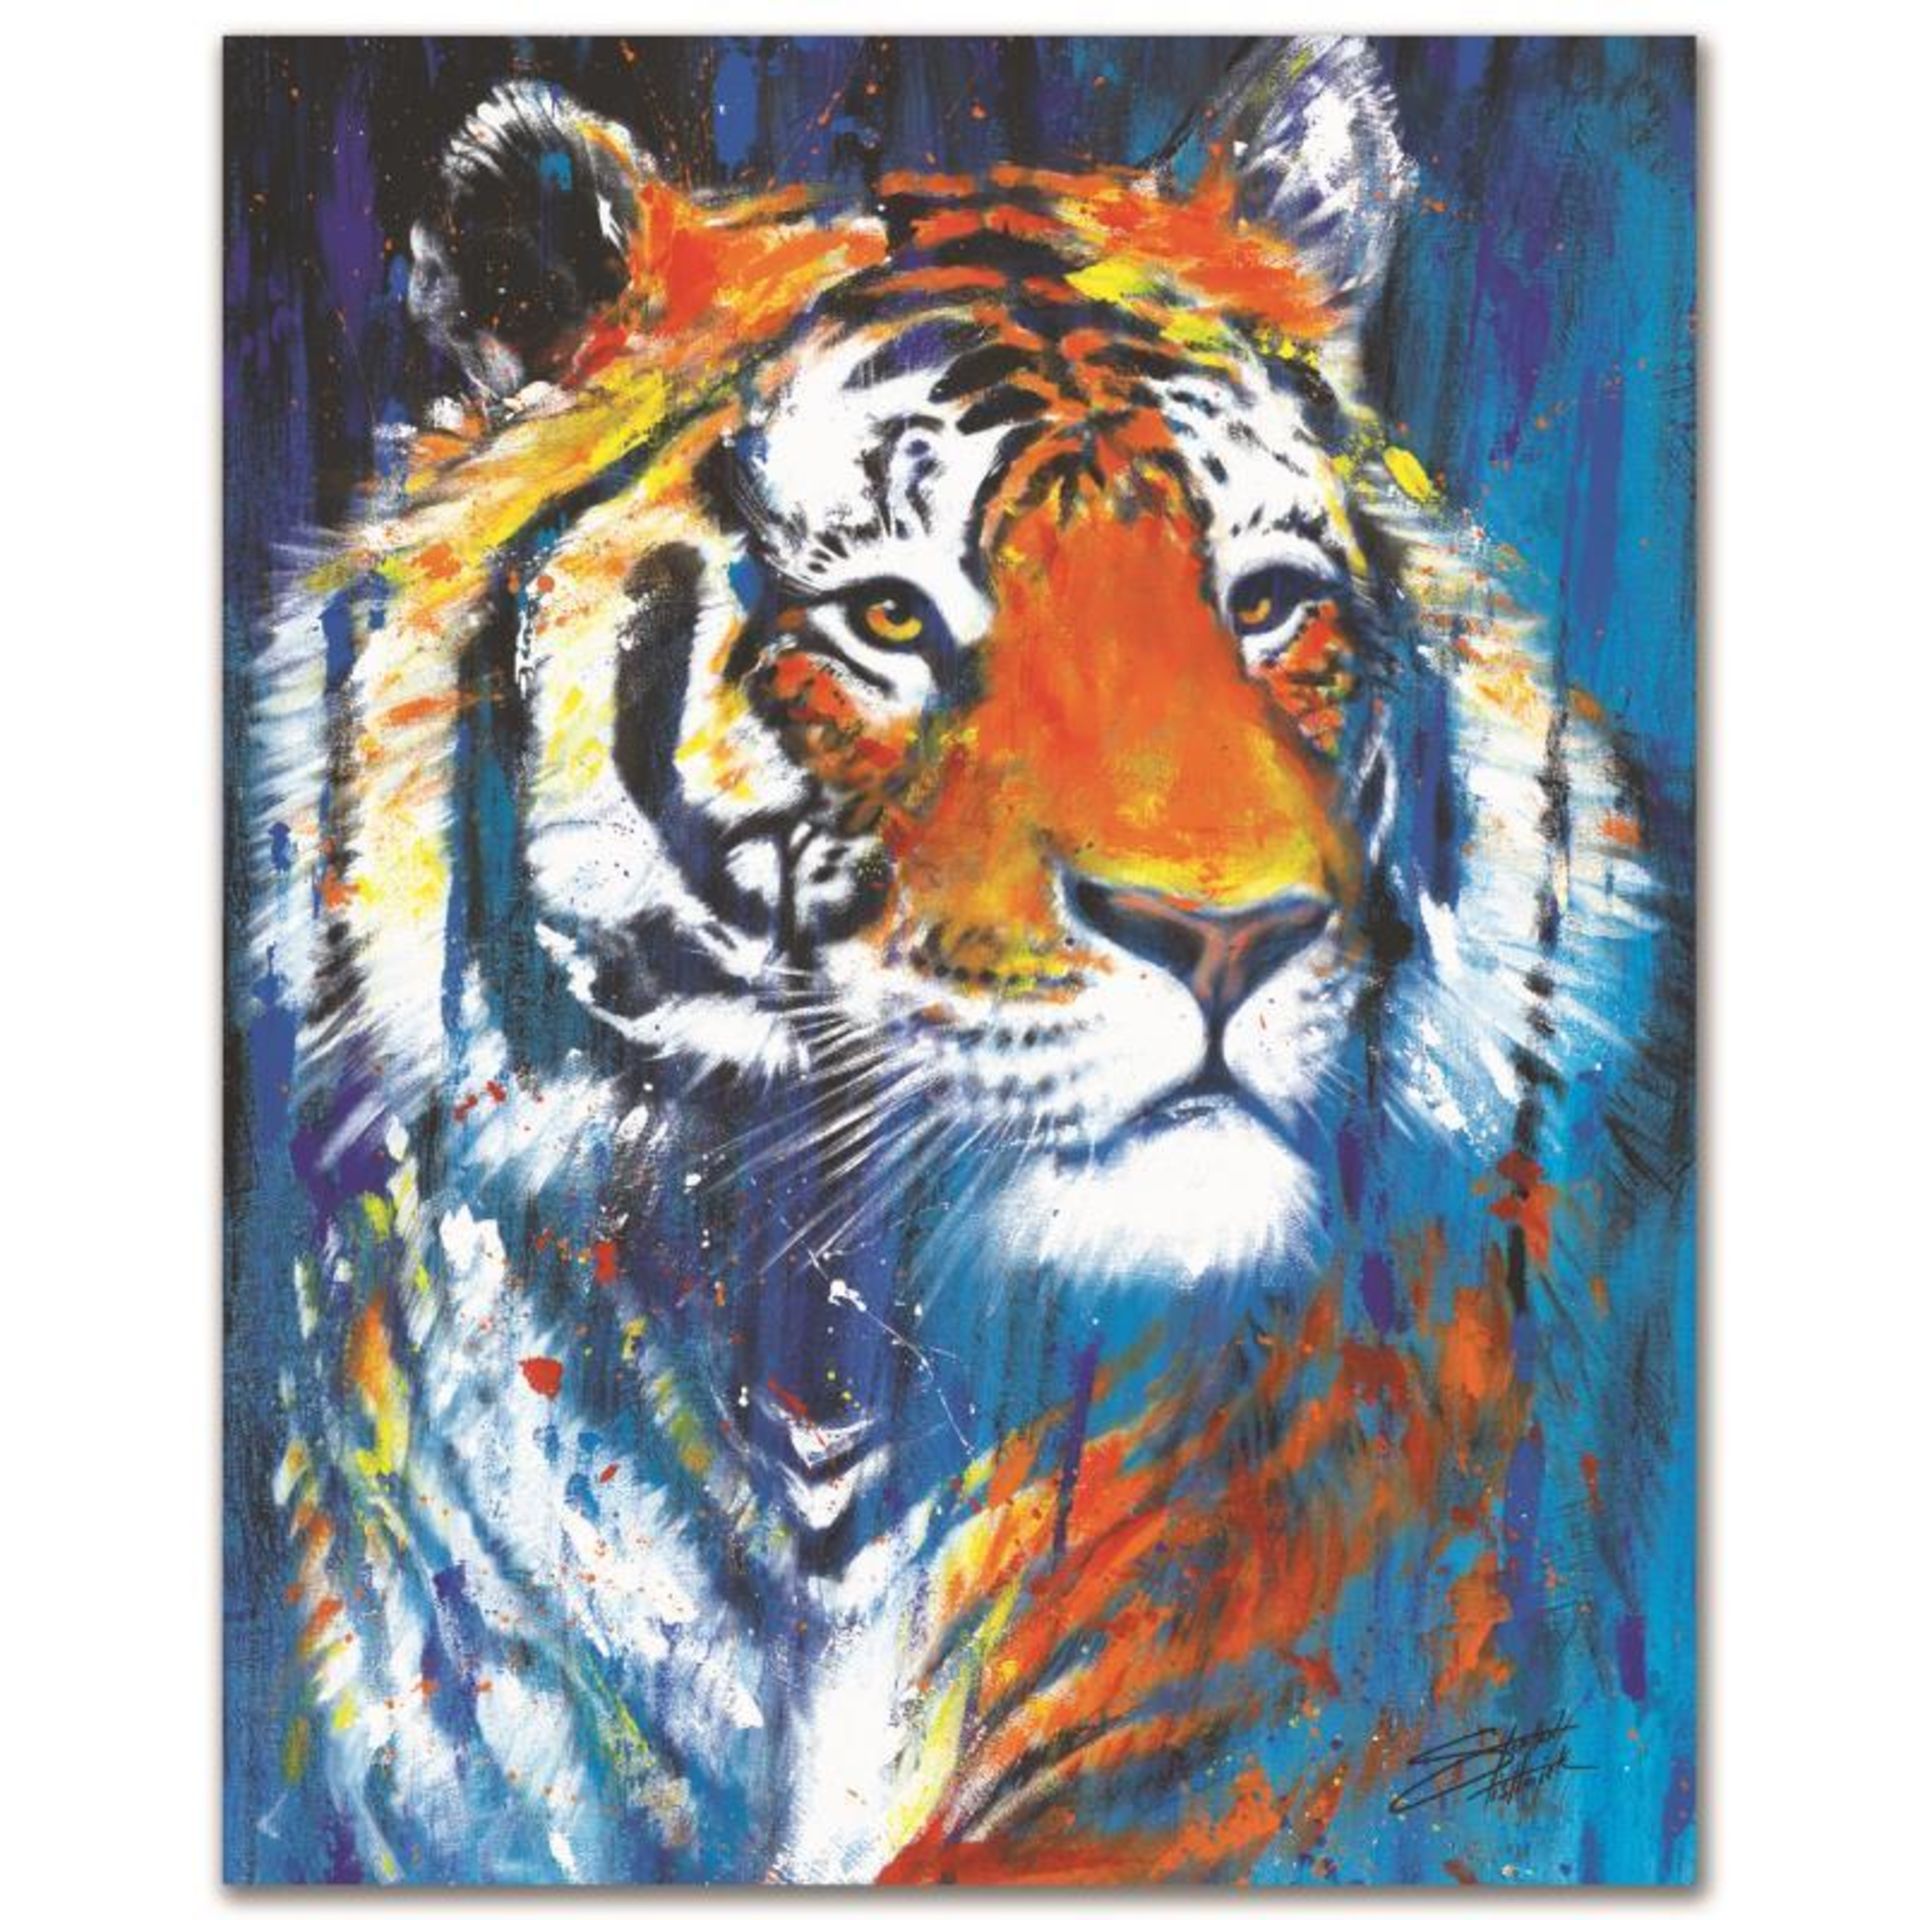 "Nala" Limited Edition Giclee on Canvas by Stephen Fishwick, Numbered and Signed